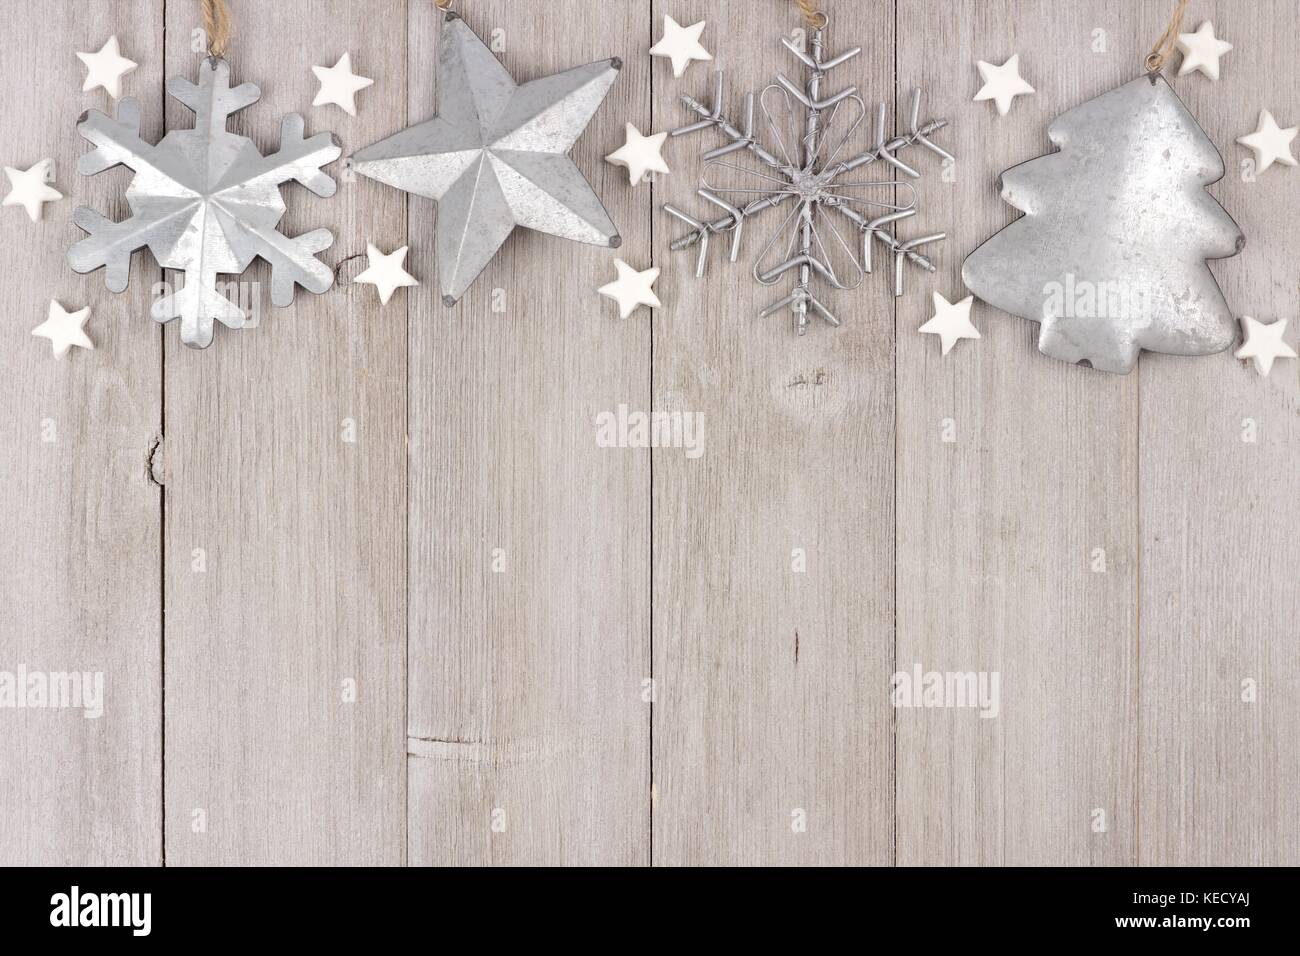 Christmas top border with shabby chic handmade clay and metal ornaments on a rustic wood background Stock Photo